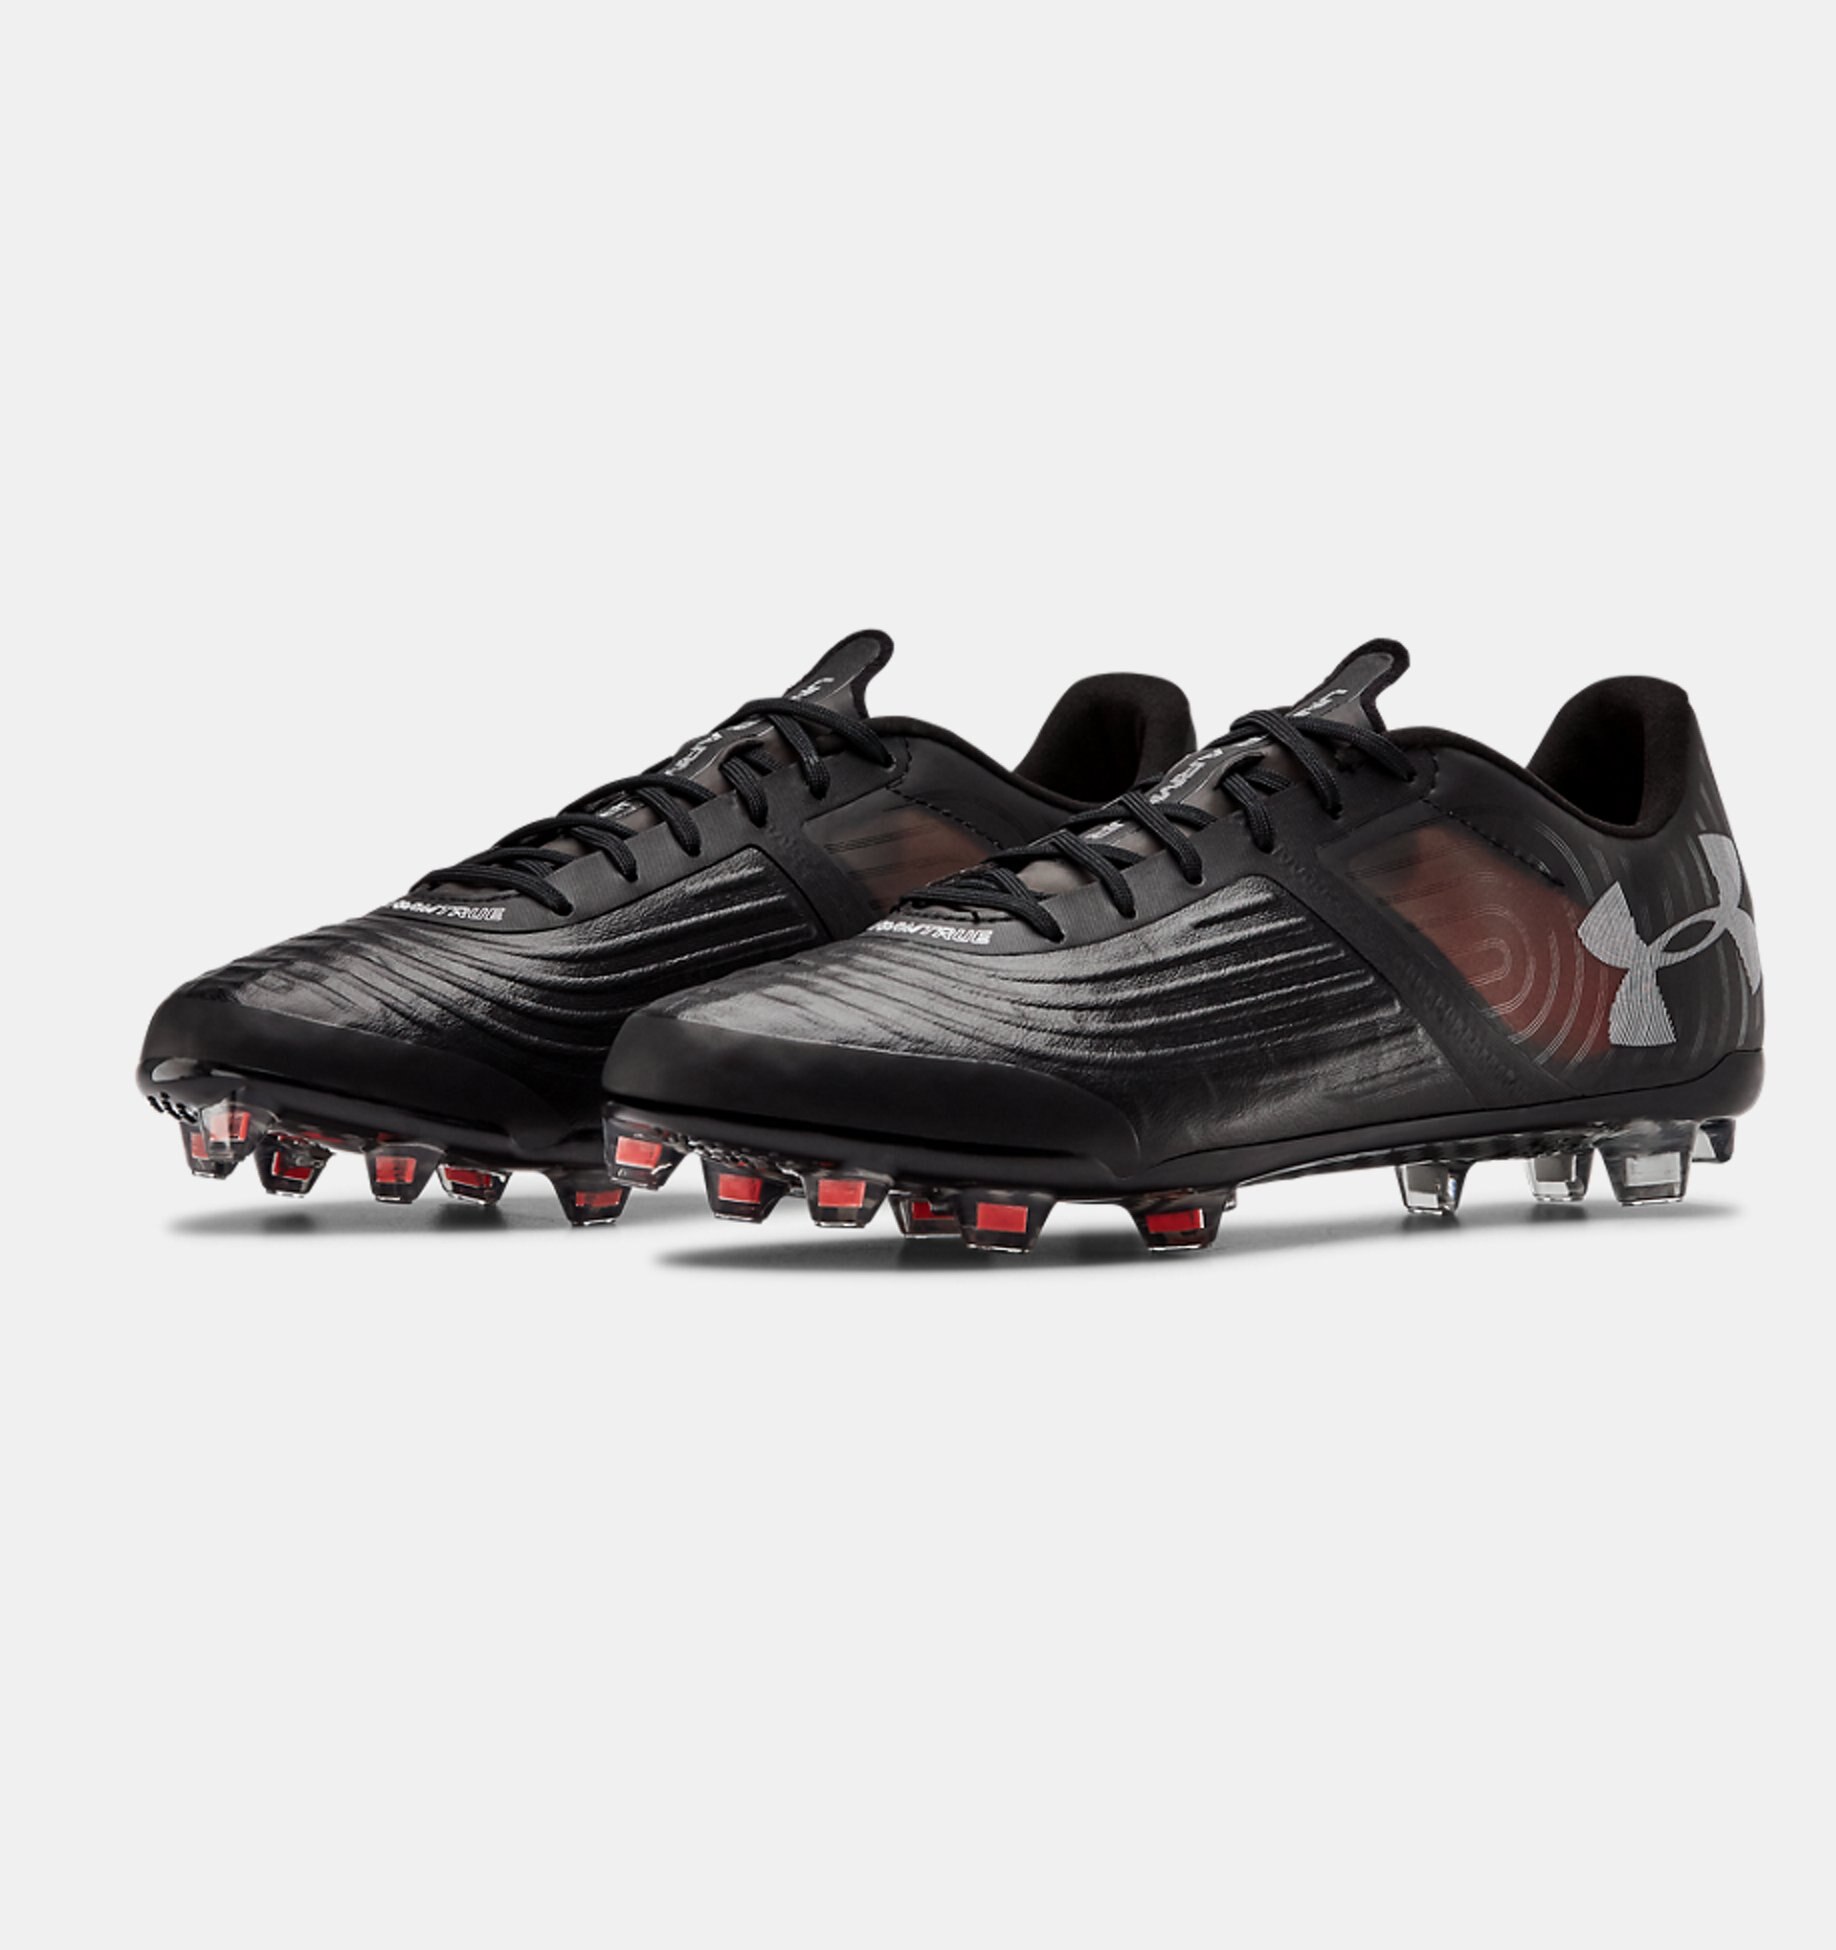 Under Armour Magnetico Pro SL FG - Black / Red | Football boots 